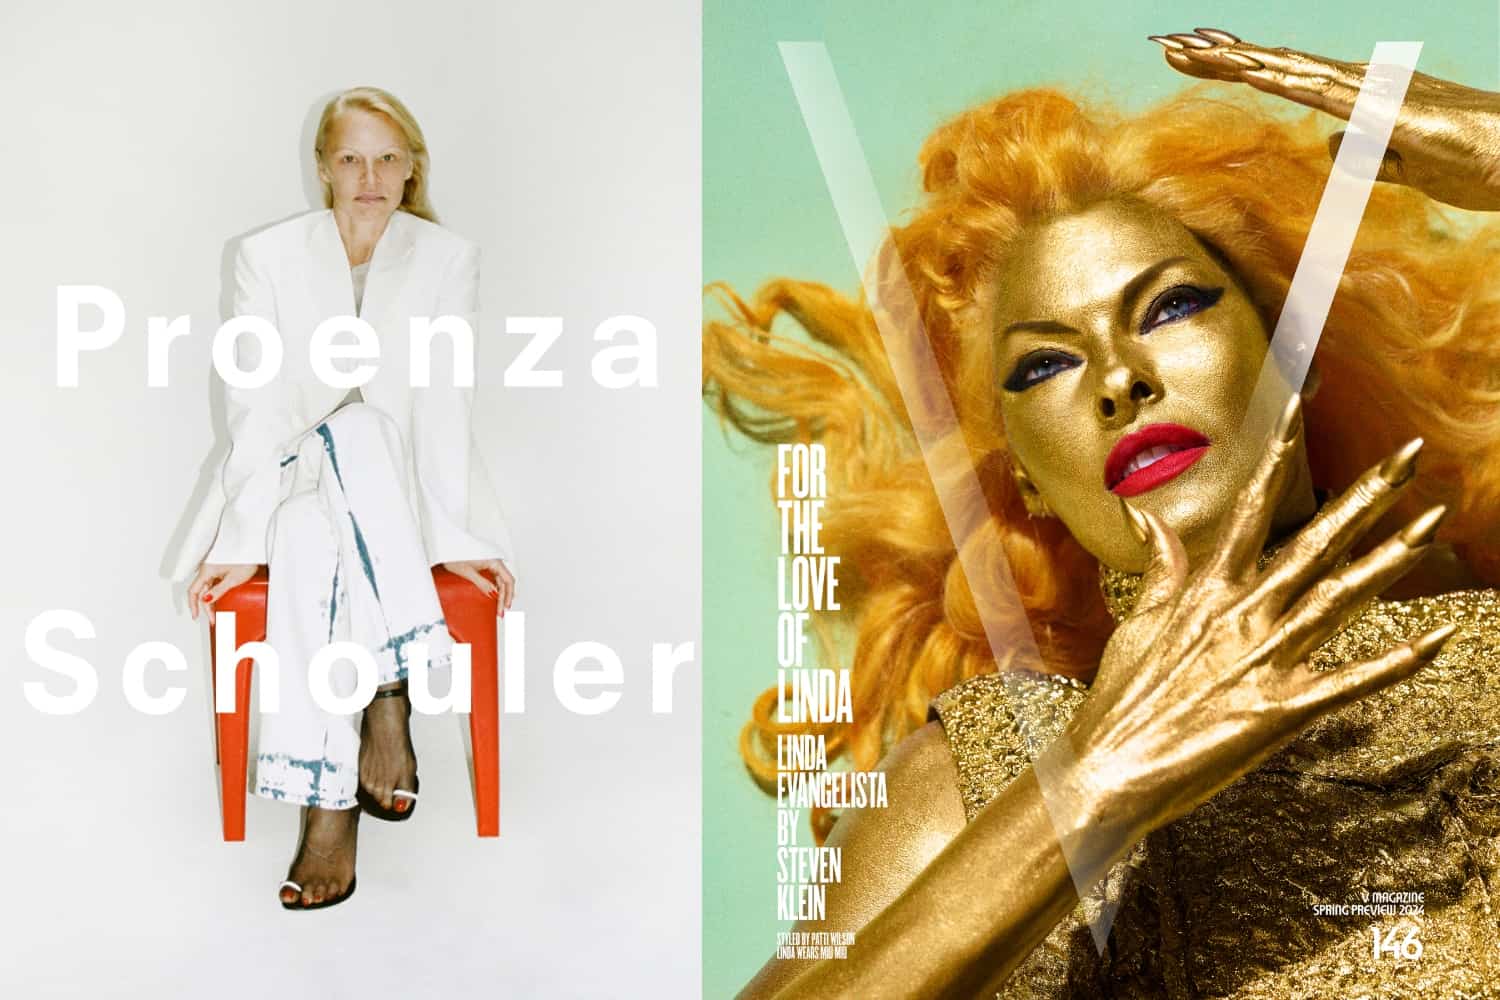 Pamela Anderson Fronts Proenza Schouler’s New Campaign, Linda Evangelista Covers V, W’s Best Performances, Rosie Huntington-Whiteley For Alo, And More!